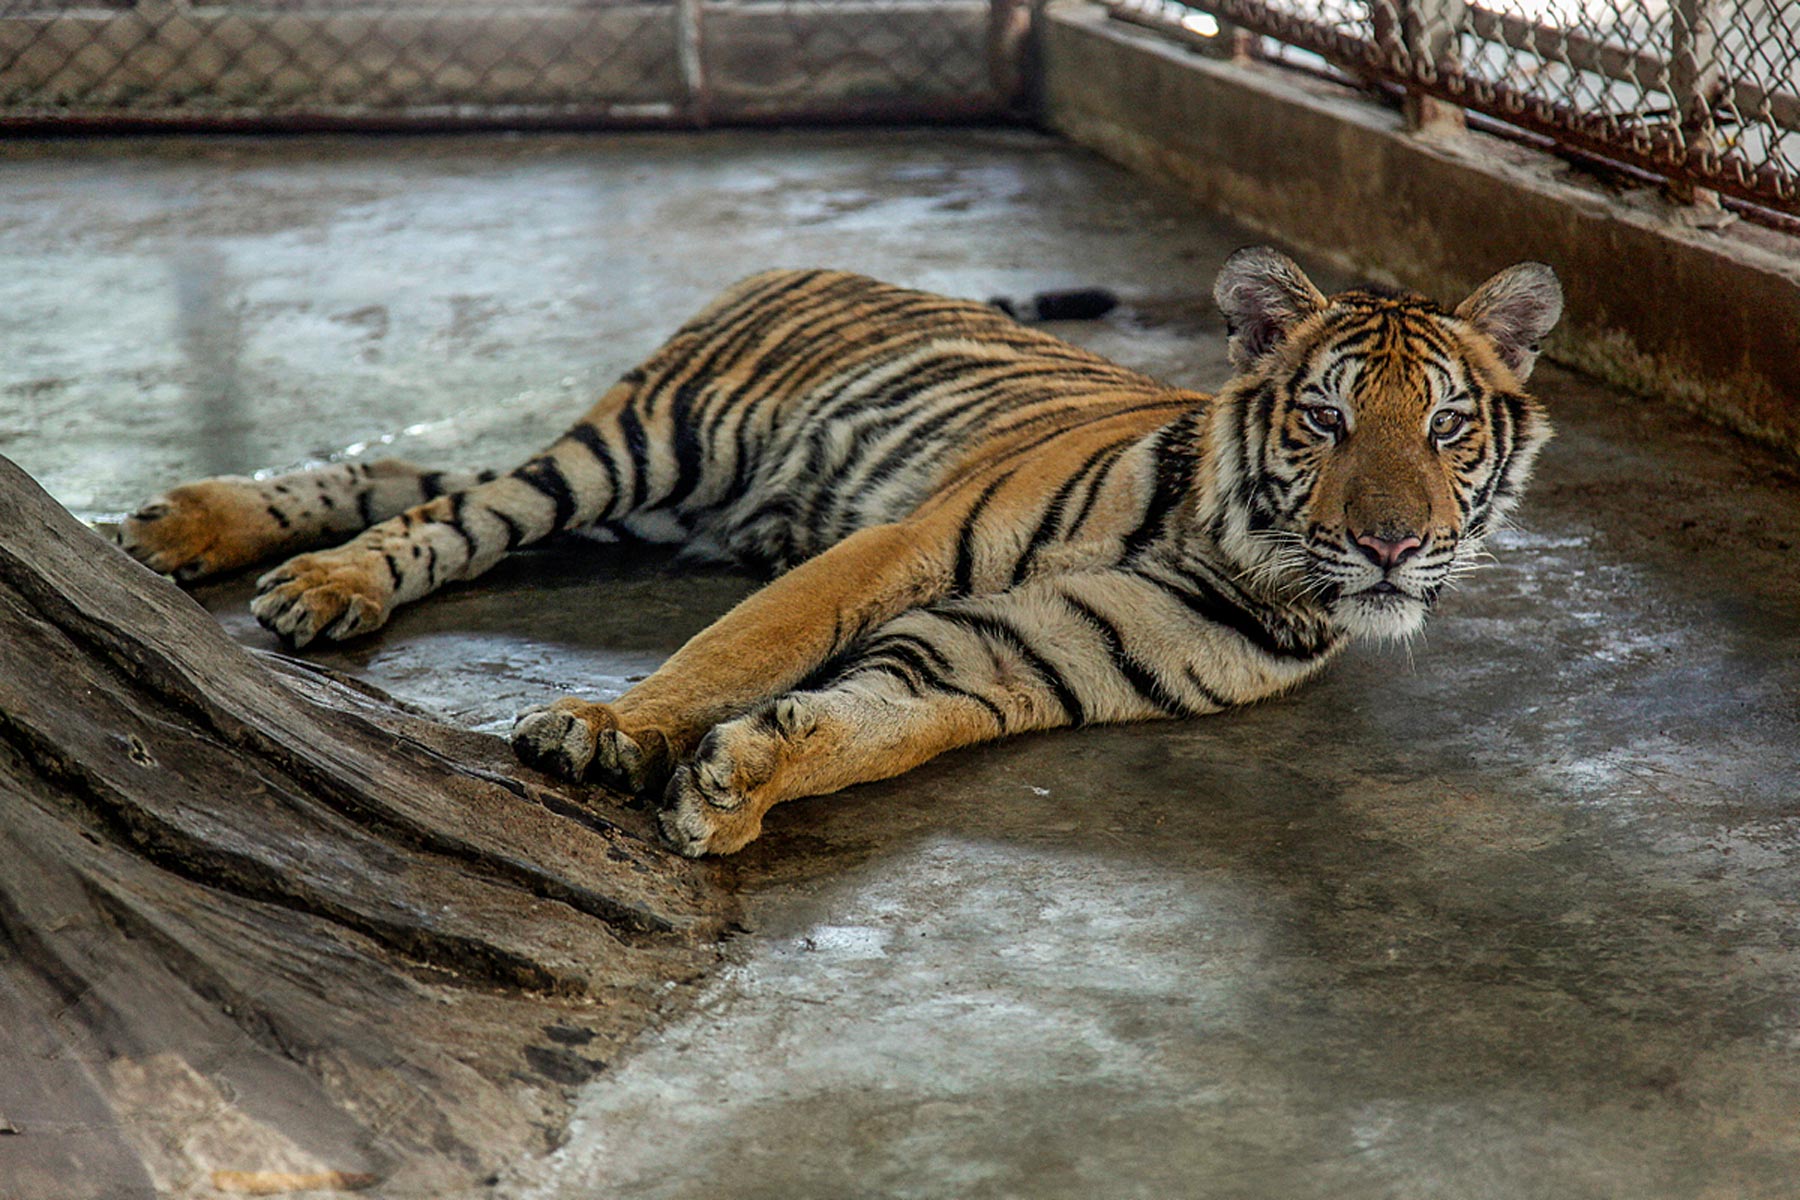 An Indochinese tiger at the Sriracha Tiger Zoo, Sriracha, Thailand. COVID 19 caused the collapse of tourism in Thailand in 2020 and it is yet to recover. The zoo has often been accused of trading tigers that are bred on the premisis to Chinese and Vietnamese syndicates although there has never been any successful convictions.